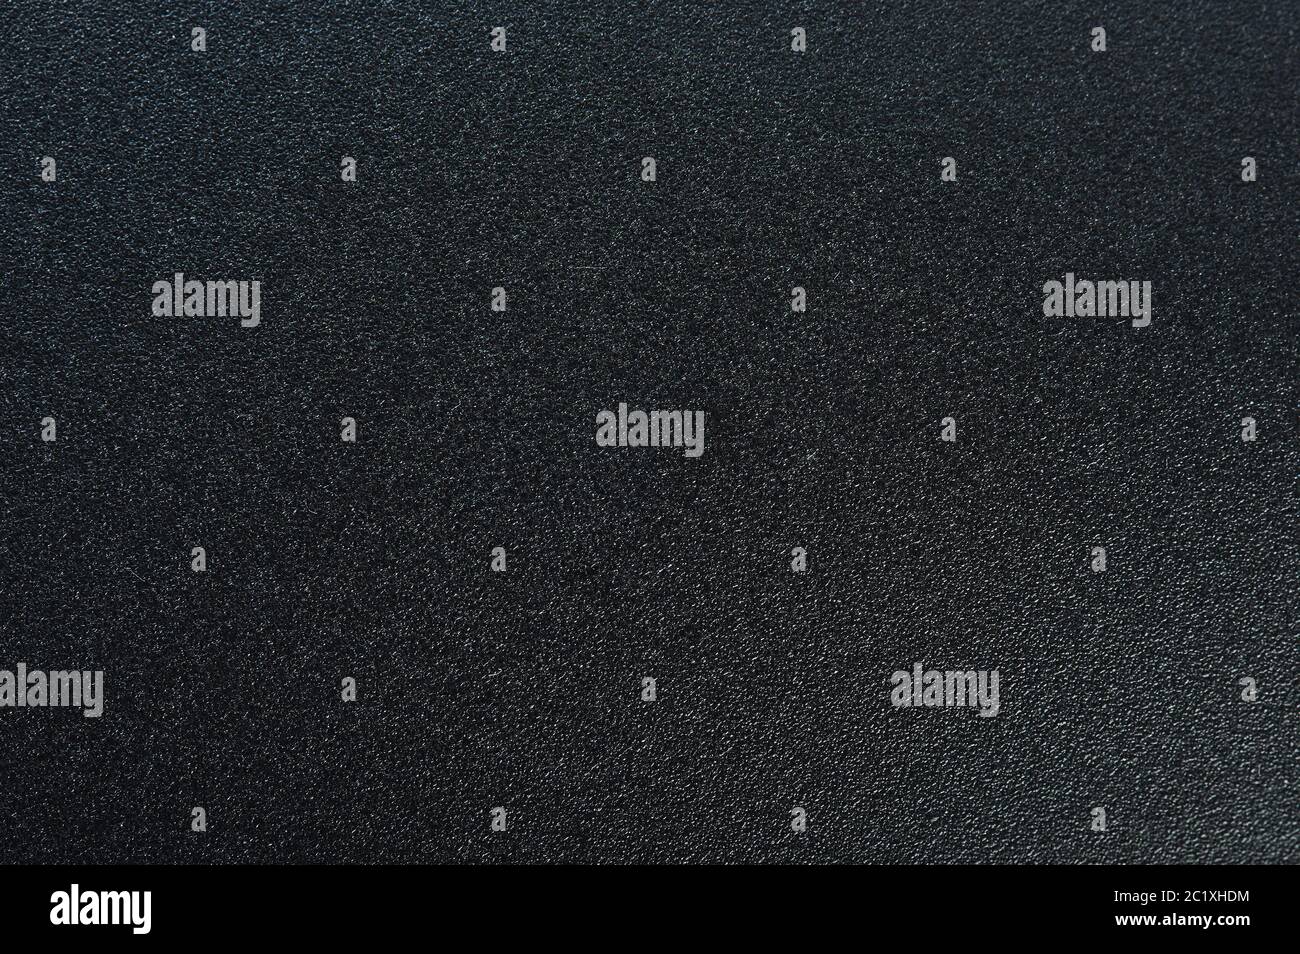 Black matte texture background with grain structure detail Stock Photo